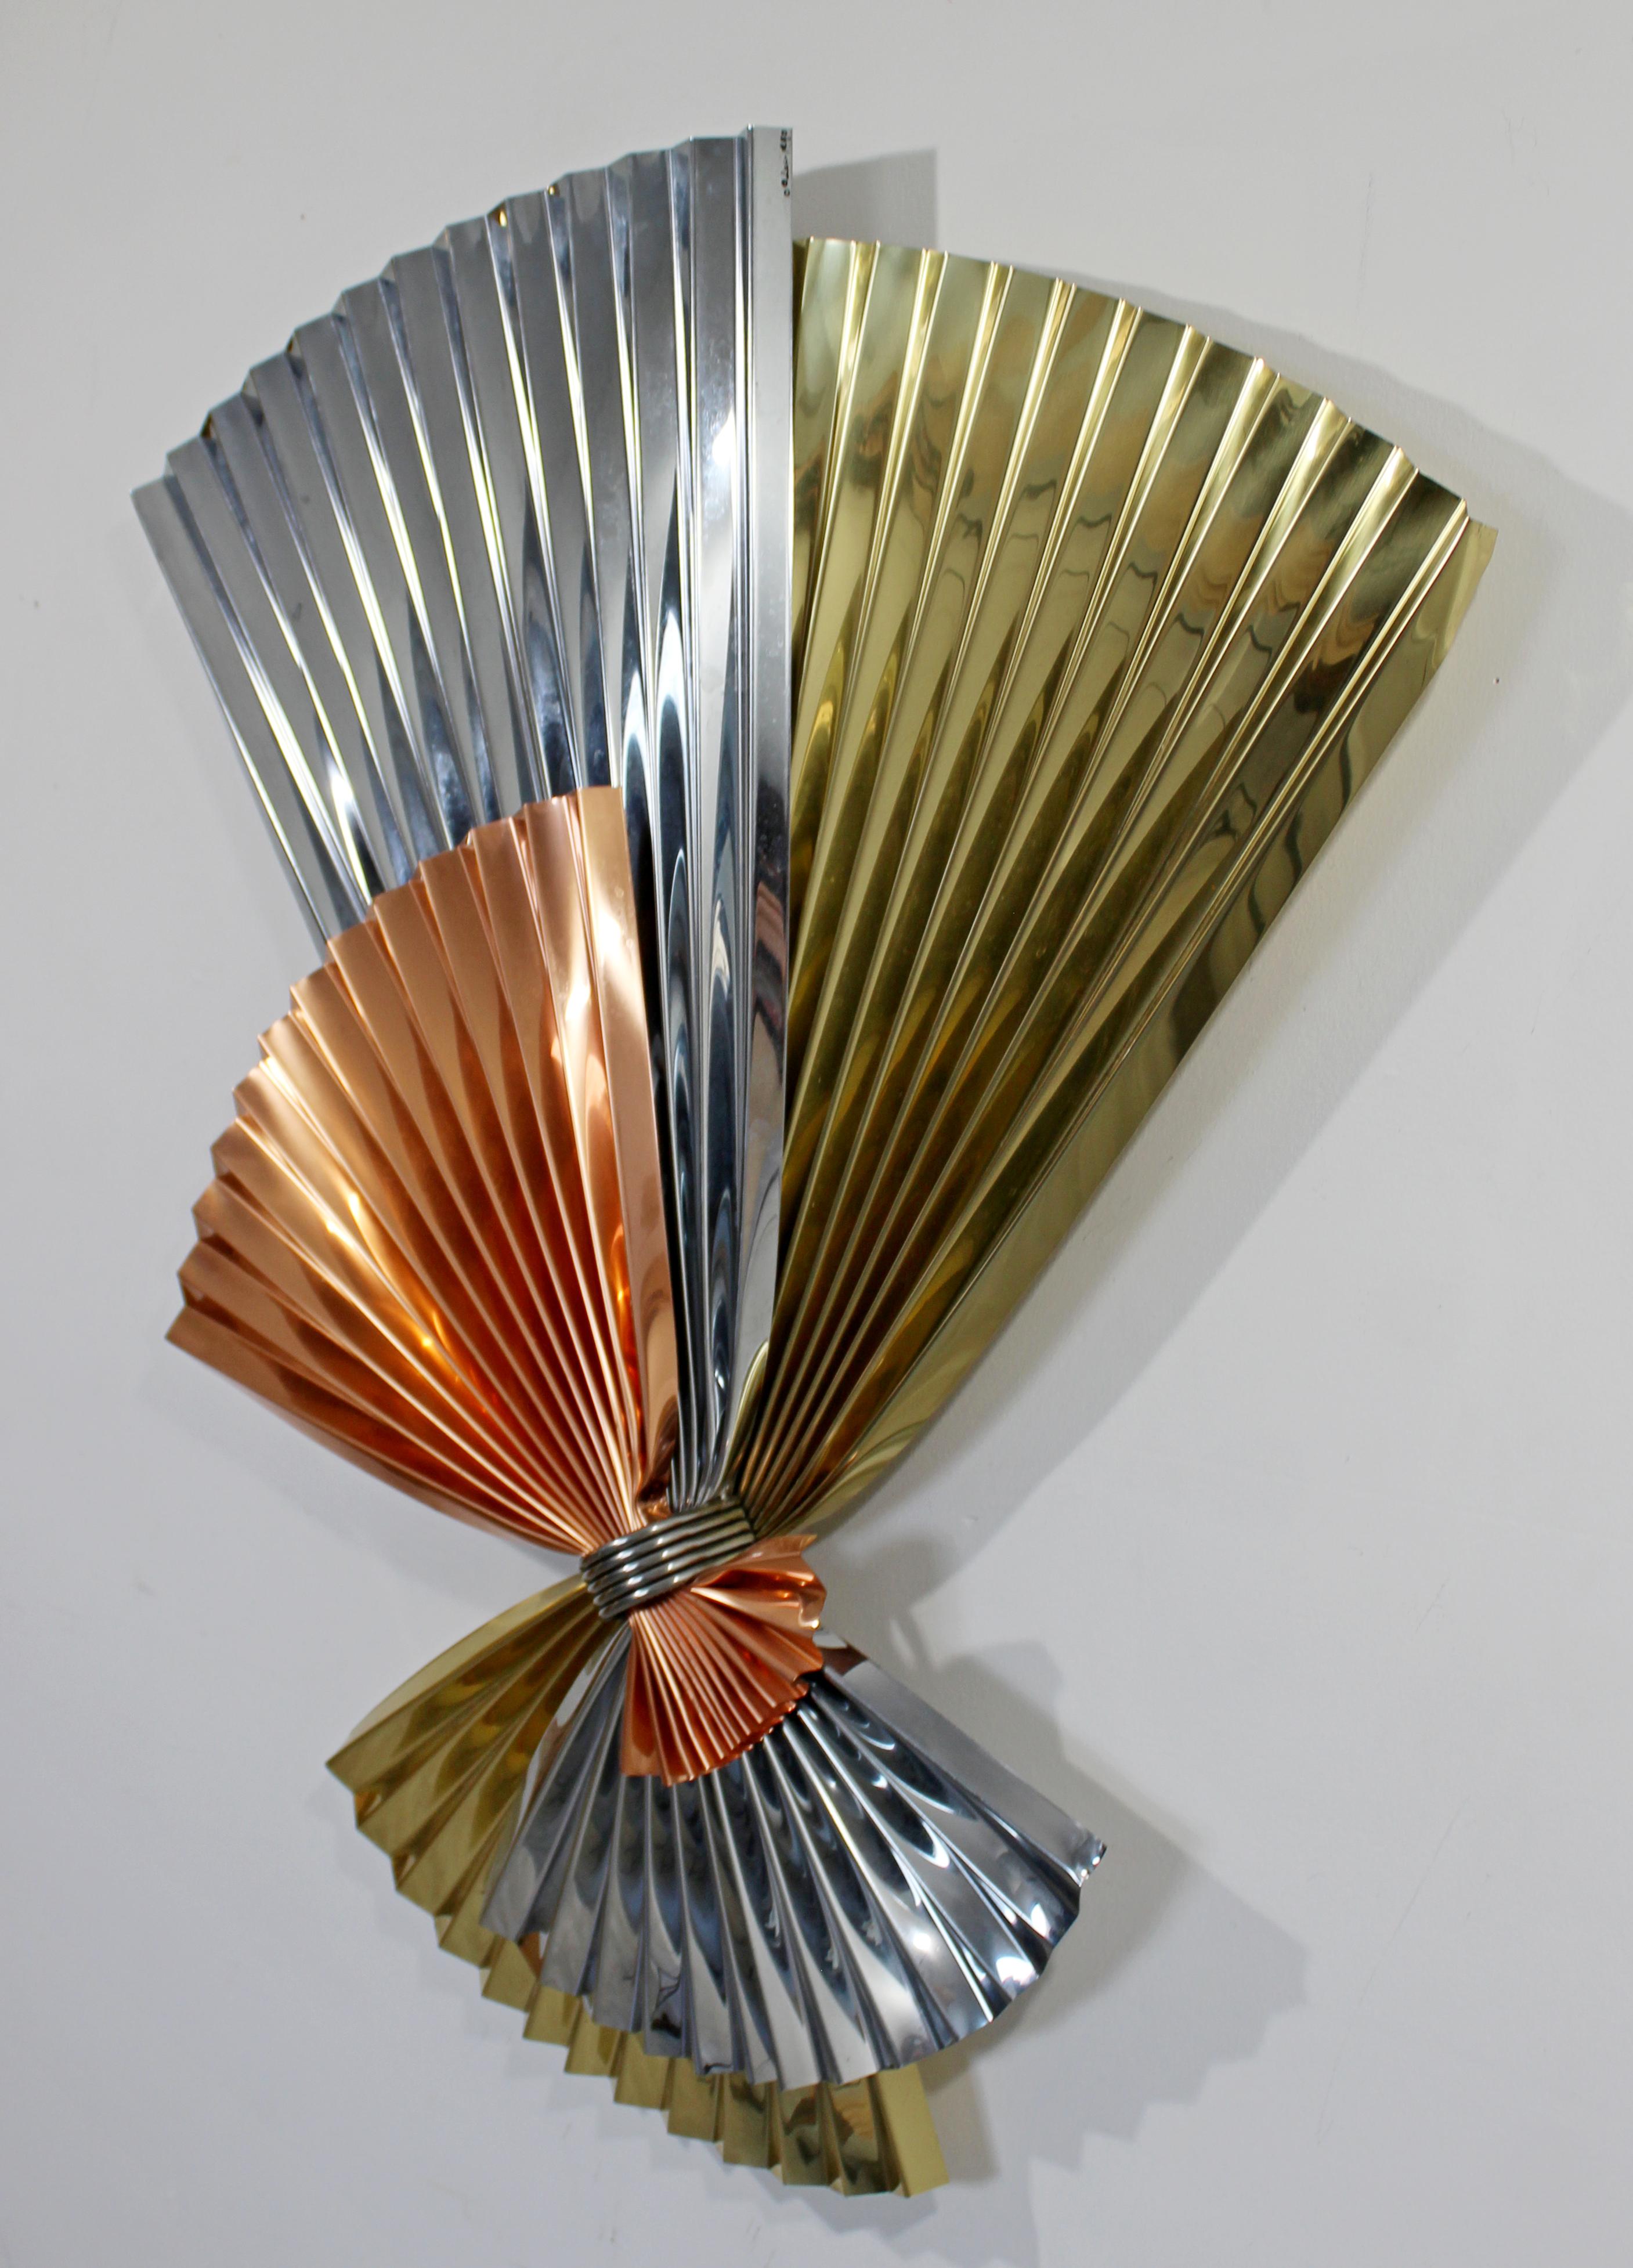 For your consideration is an extraordinary, tri-color metal fan wall sculpture, signed Curtis Jere and dated 1980. In excellent condition. The dimensions are 35